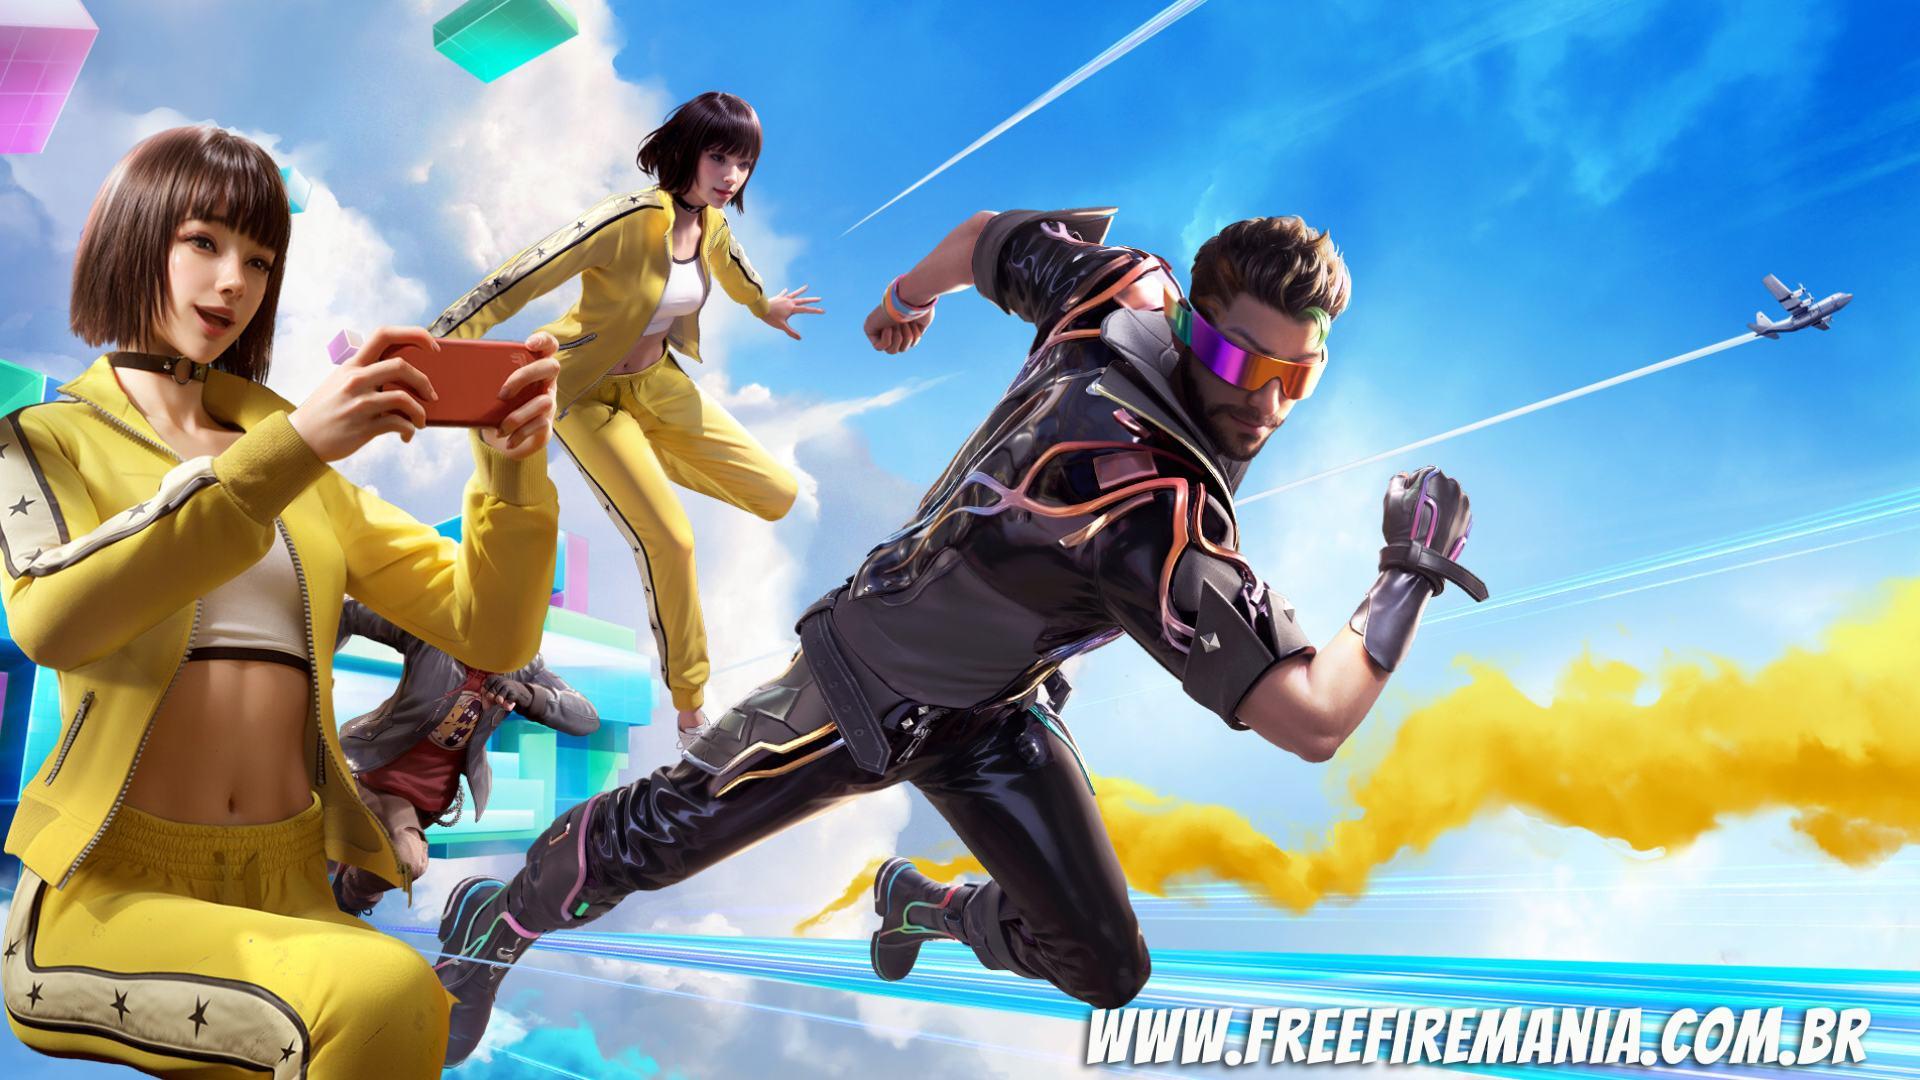 Free Fire: The game that conquered the world